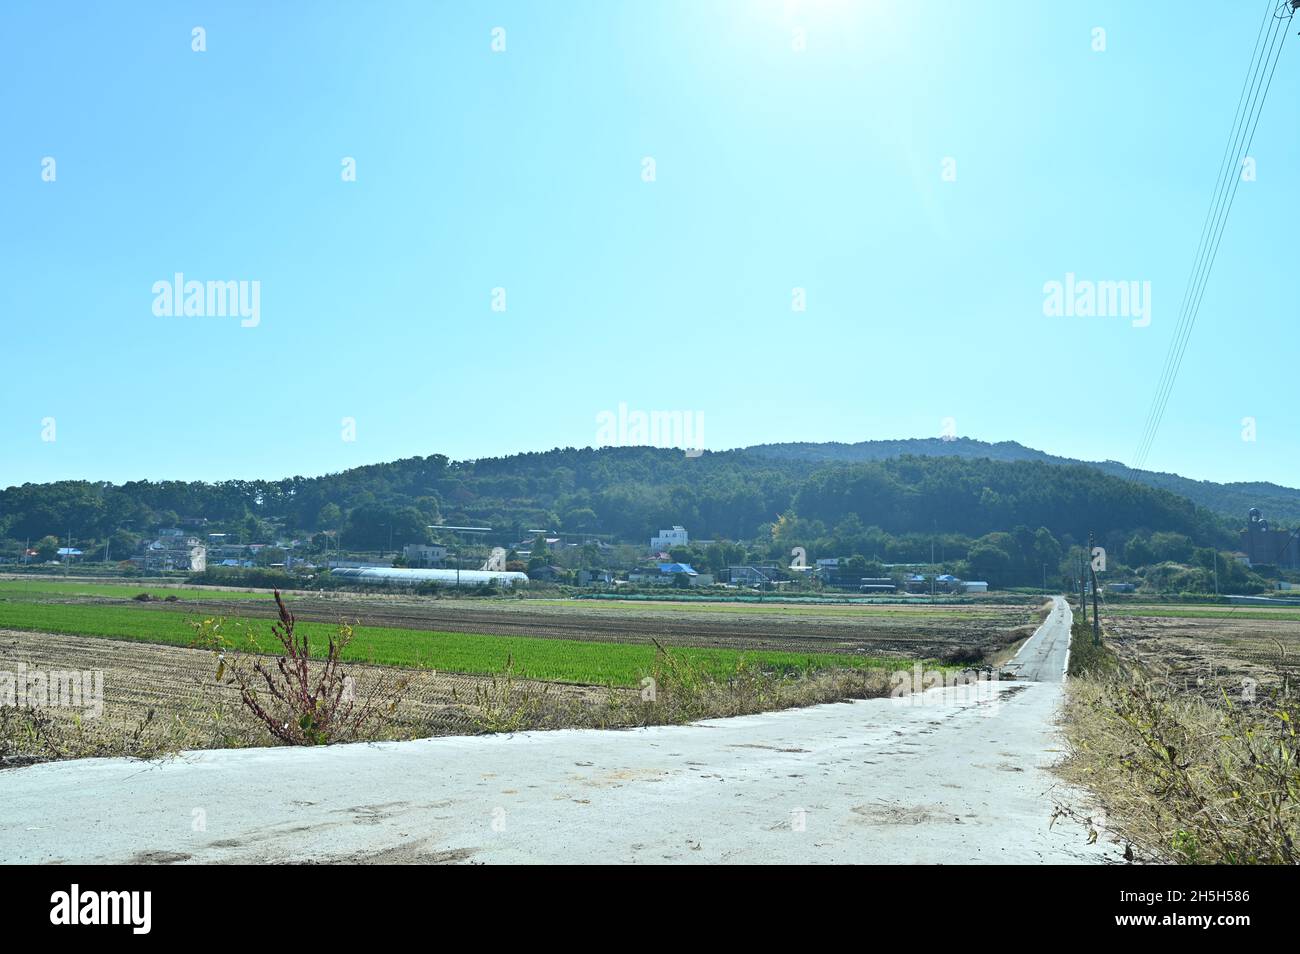 You can feel peace in the clear sky and the scenery of the countryside, and the long road makes you want to travel somewhere. Stock Photo